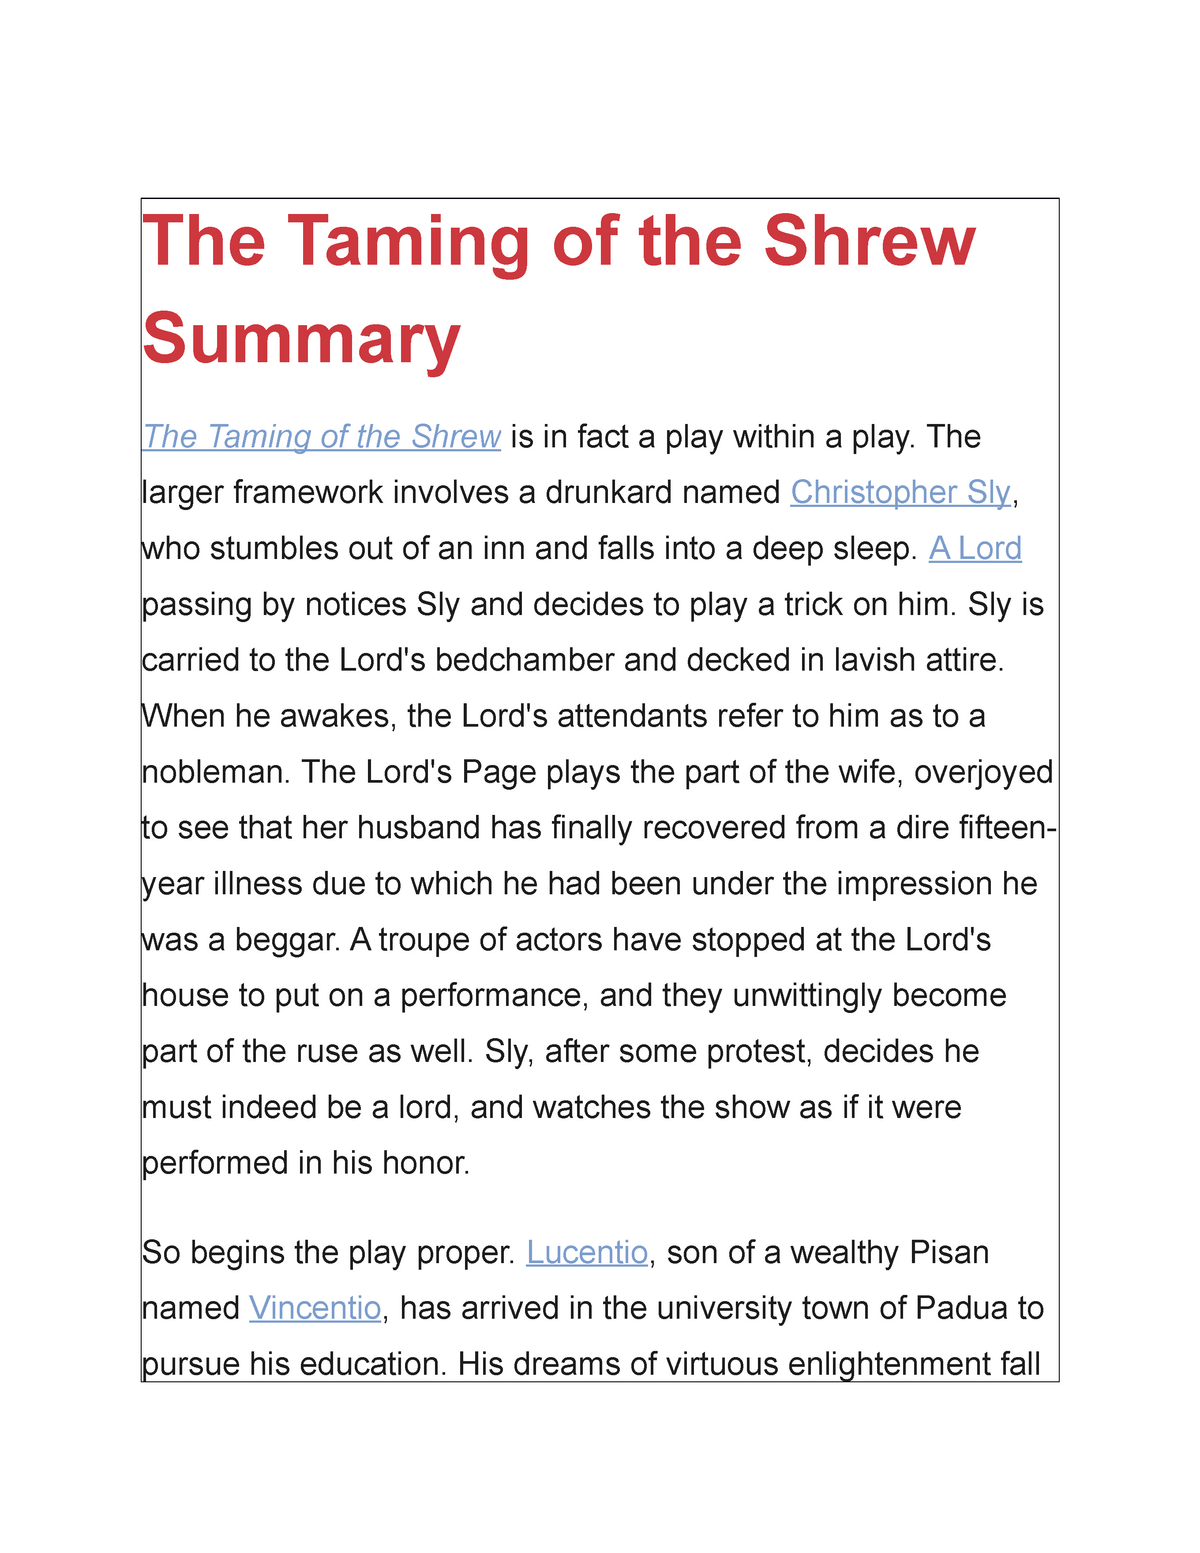 essay on taming of the shrew